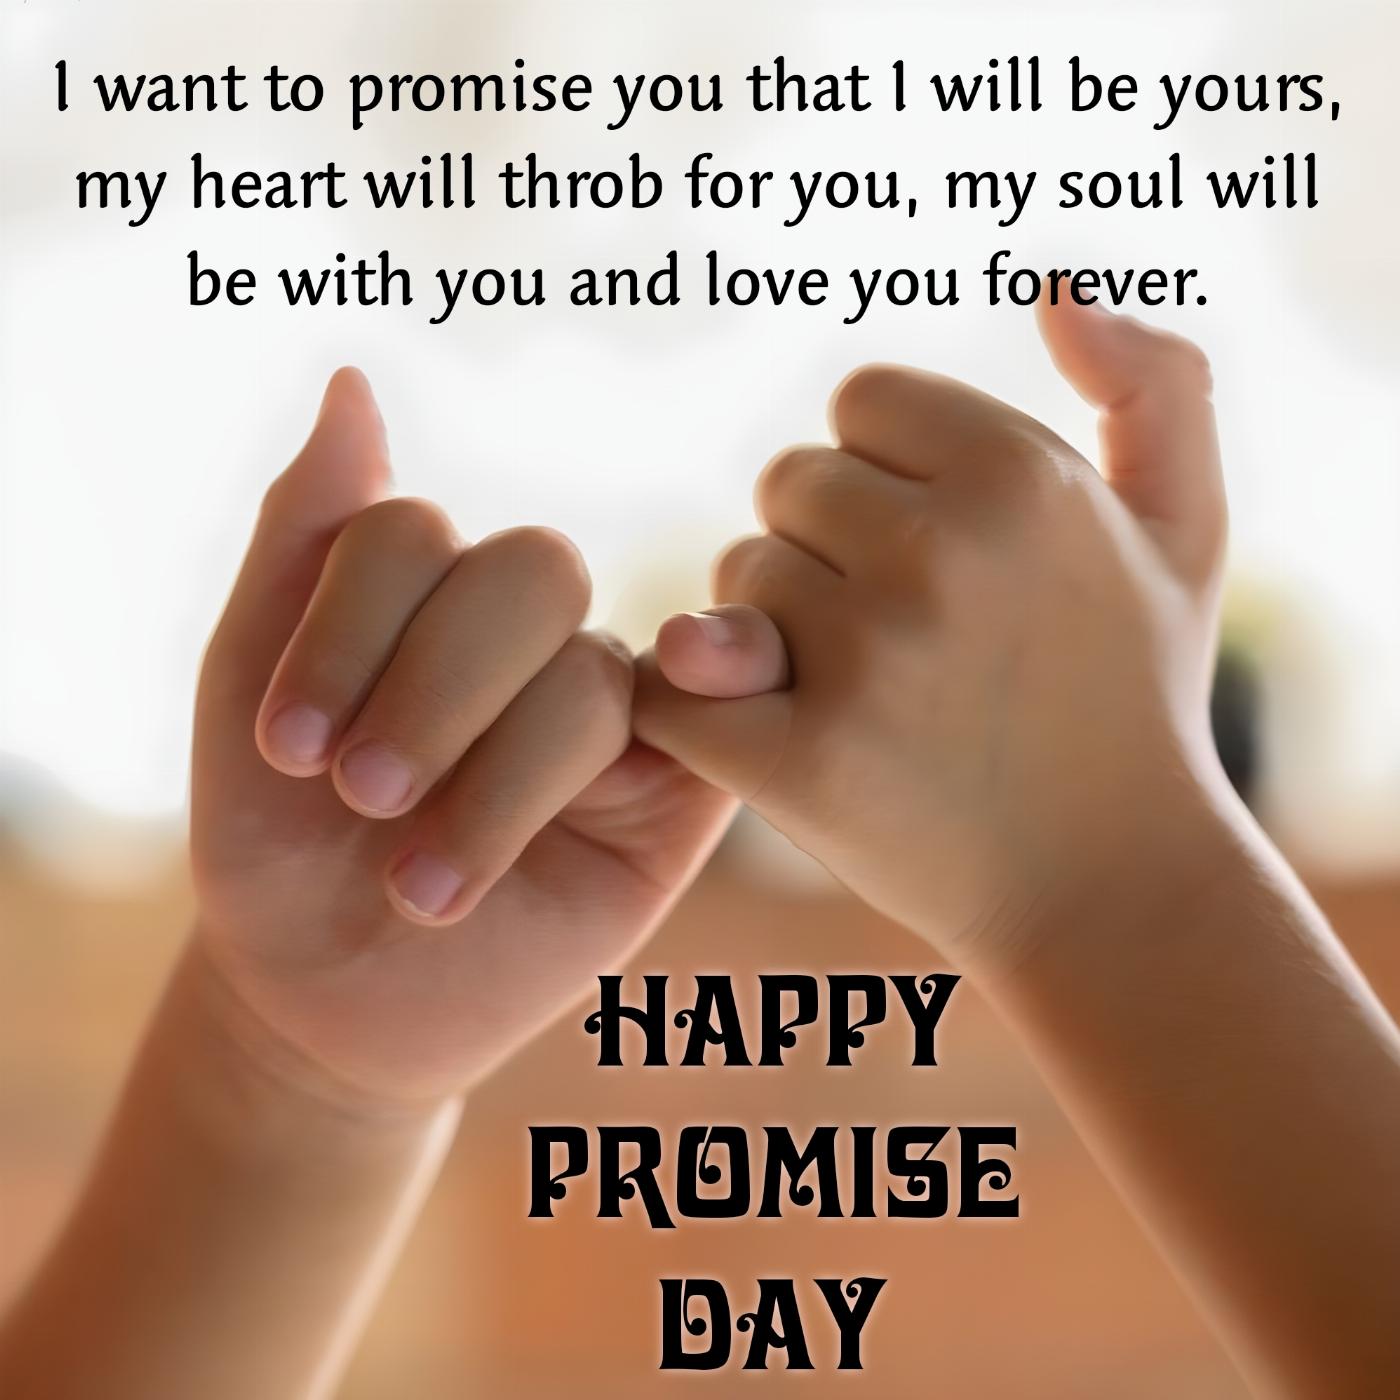 I want to promise you that I will be yours